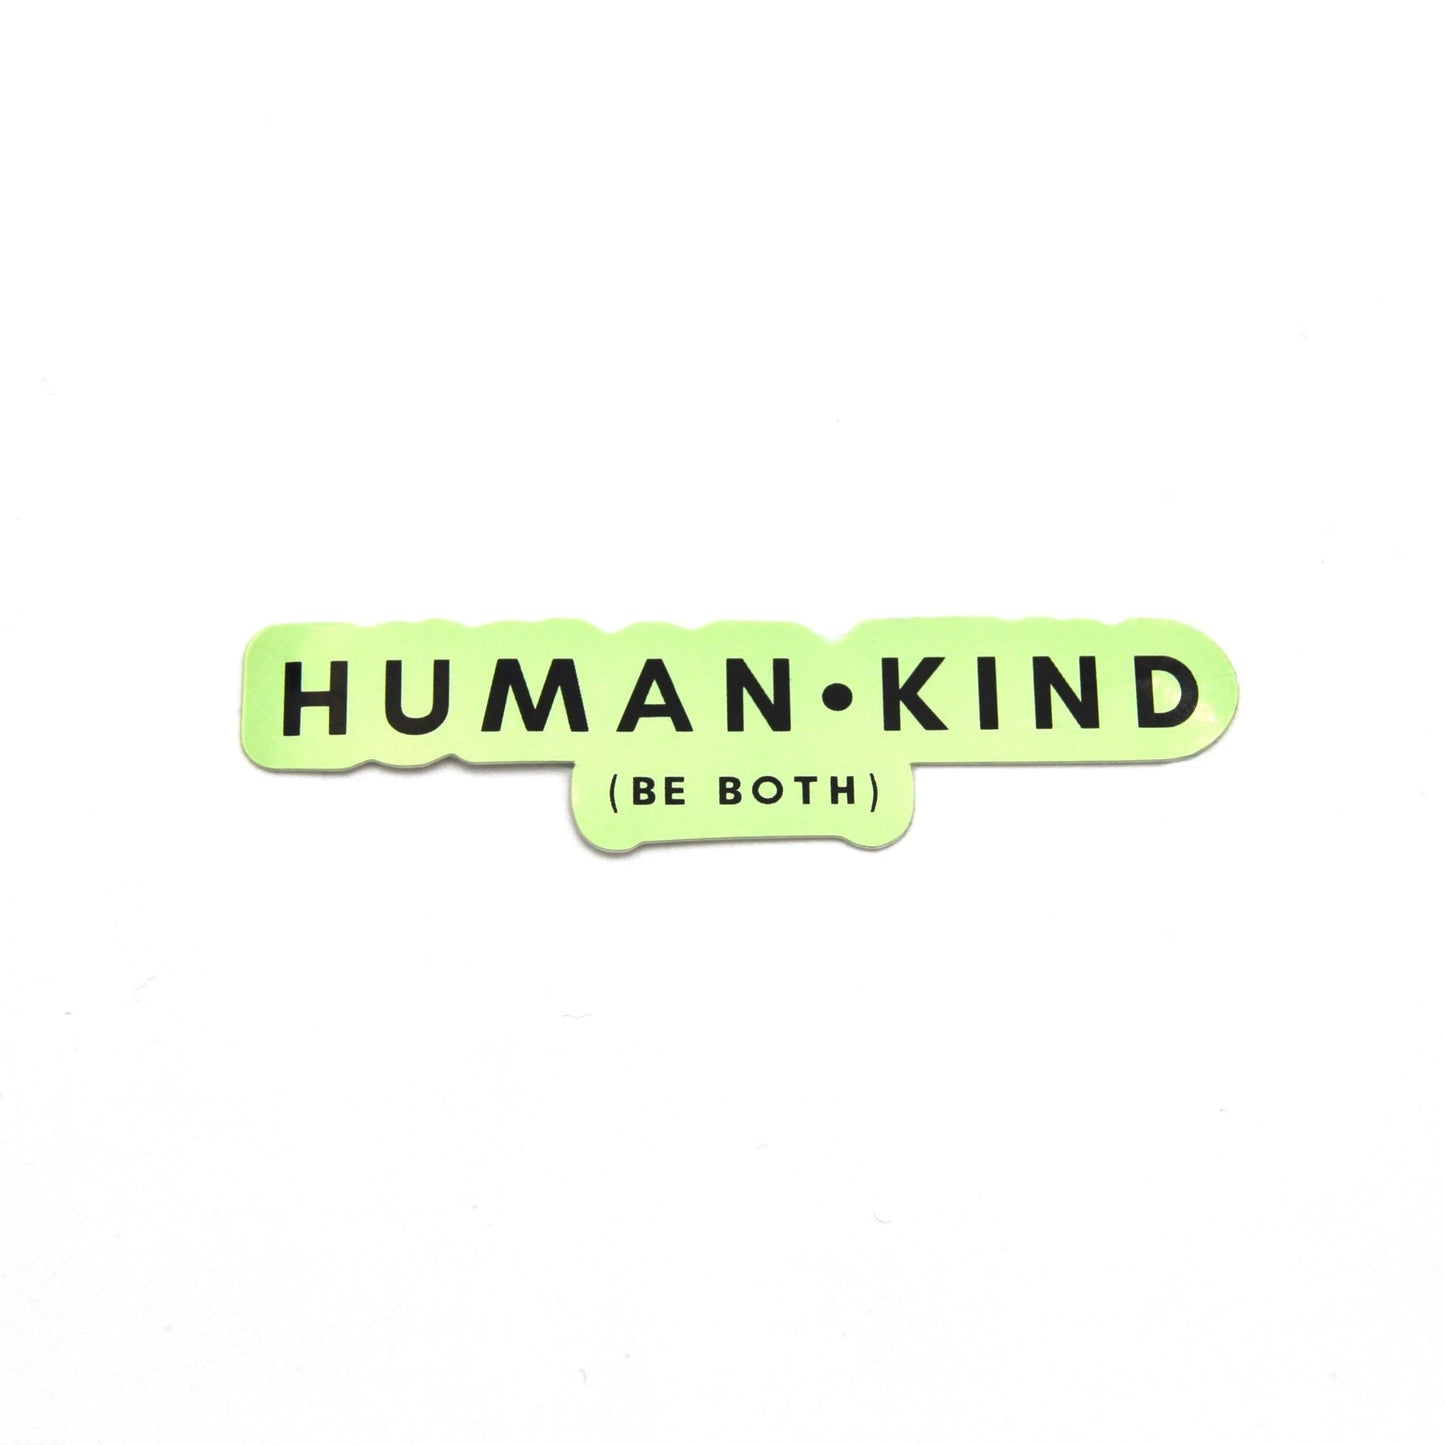 Human Kind Sticker Wear The Peace Stickers 0.5 inches x 3 inches